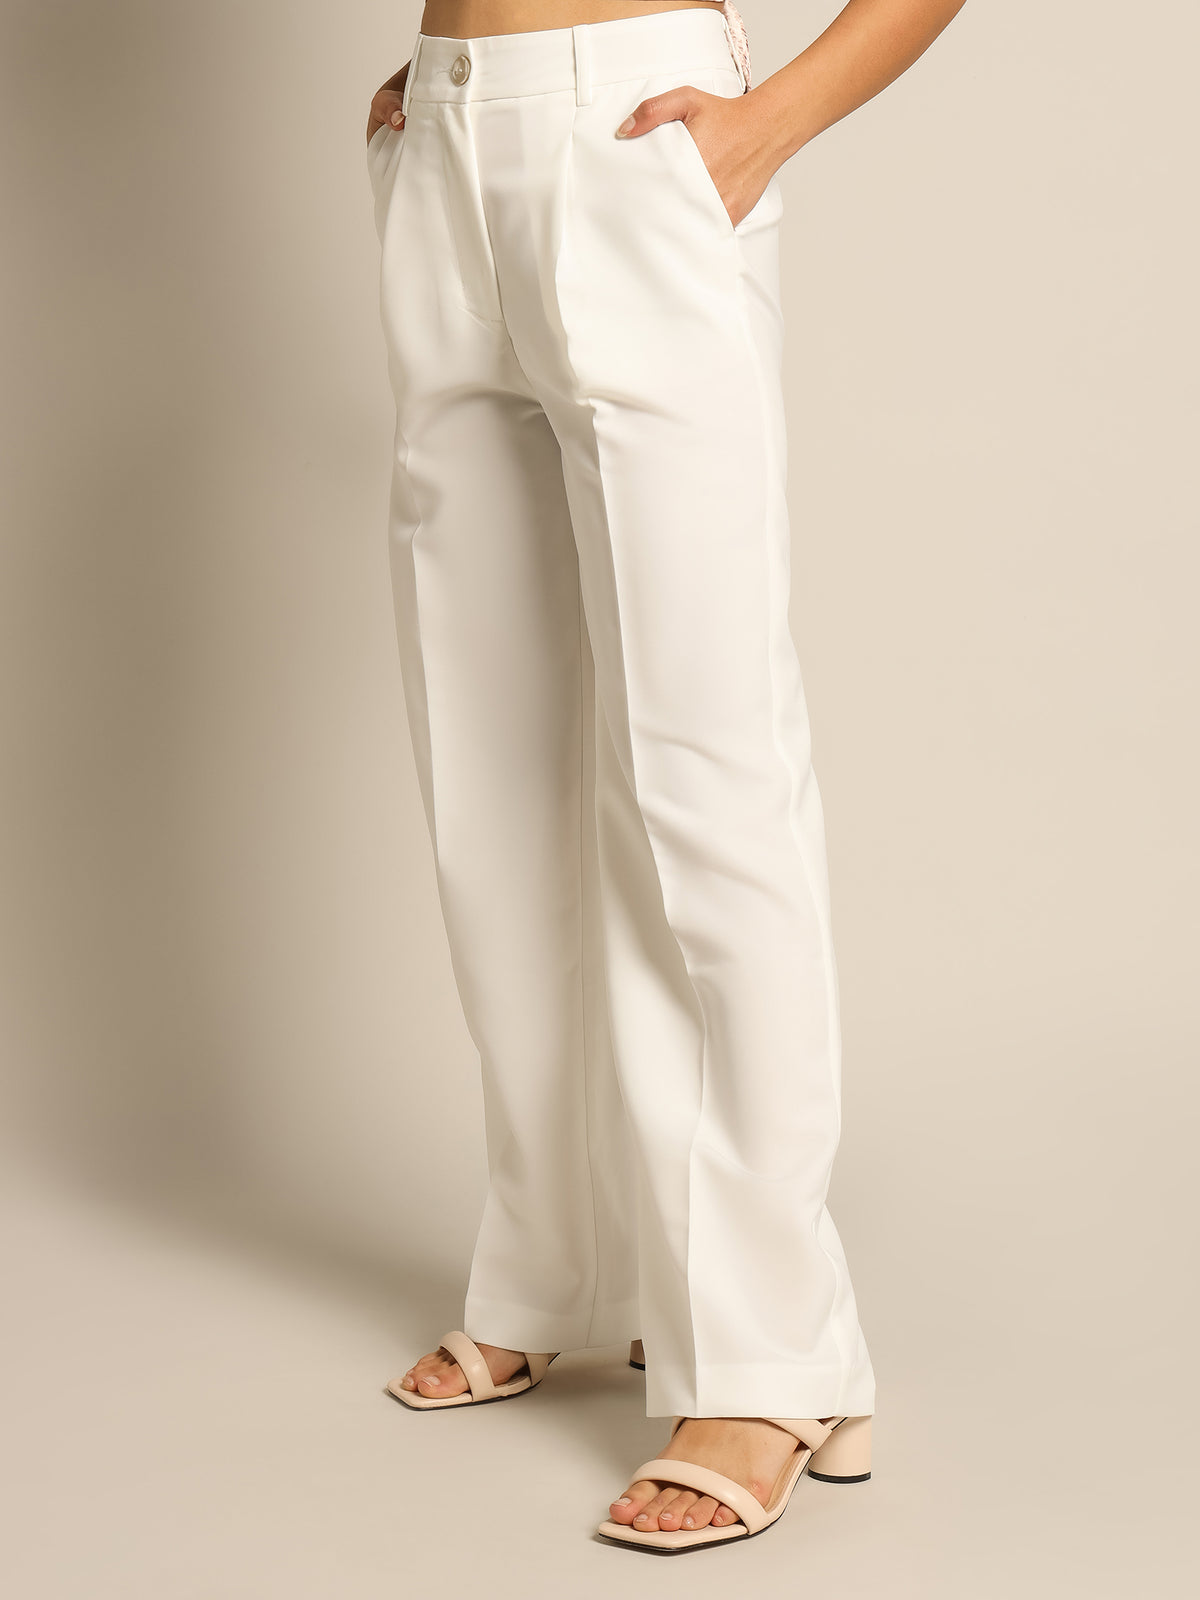 Claudia Longline Tailored Pants in White